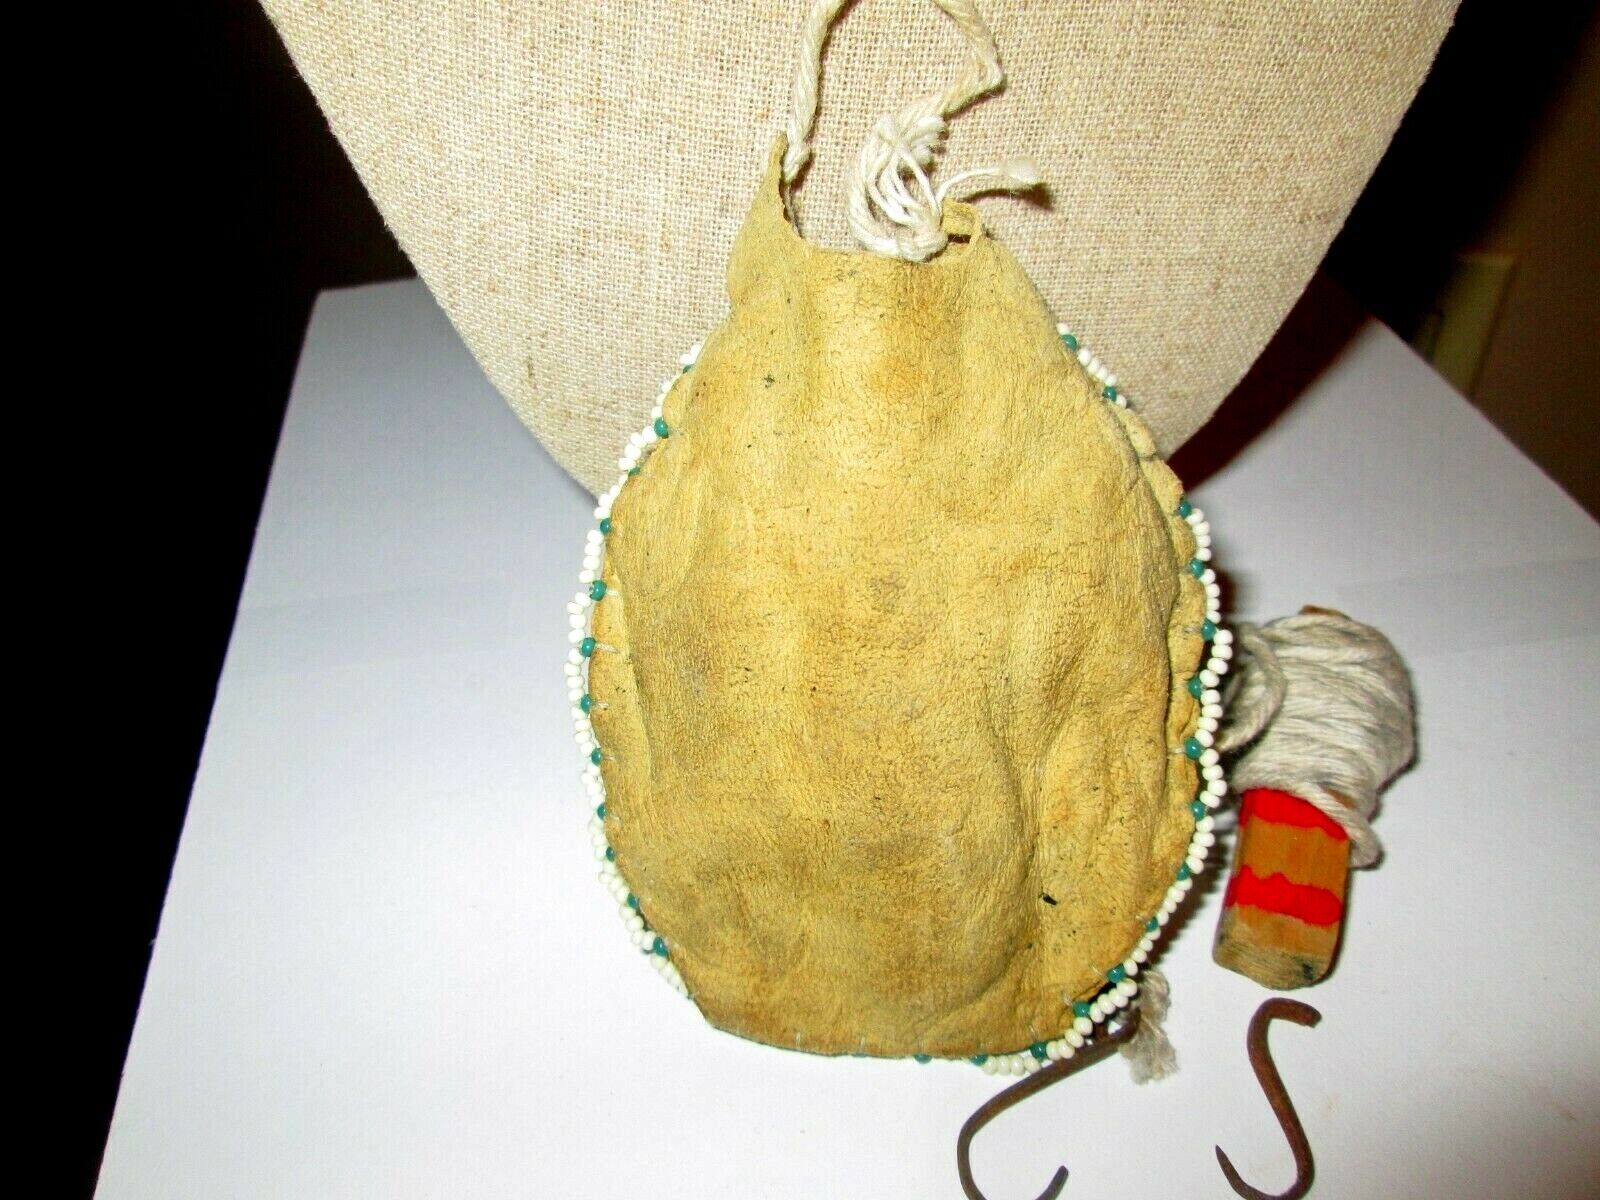 Antique Brain Tanned & Beaded Pouch with Handmade Fishing Line, with Appraisal  Без бренда - фотография #5